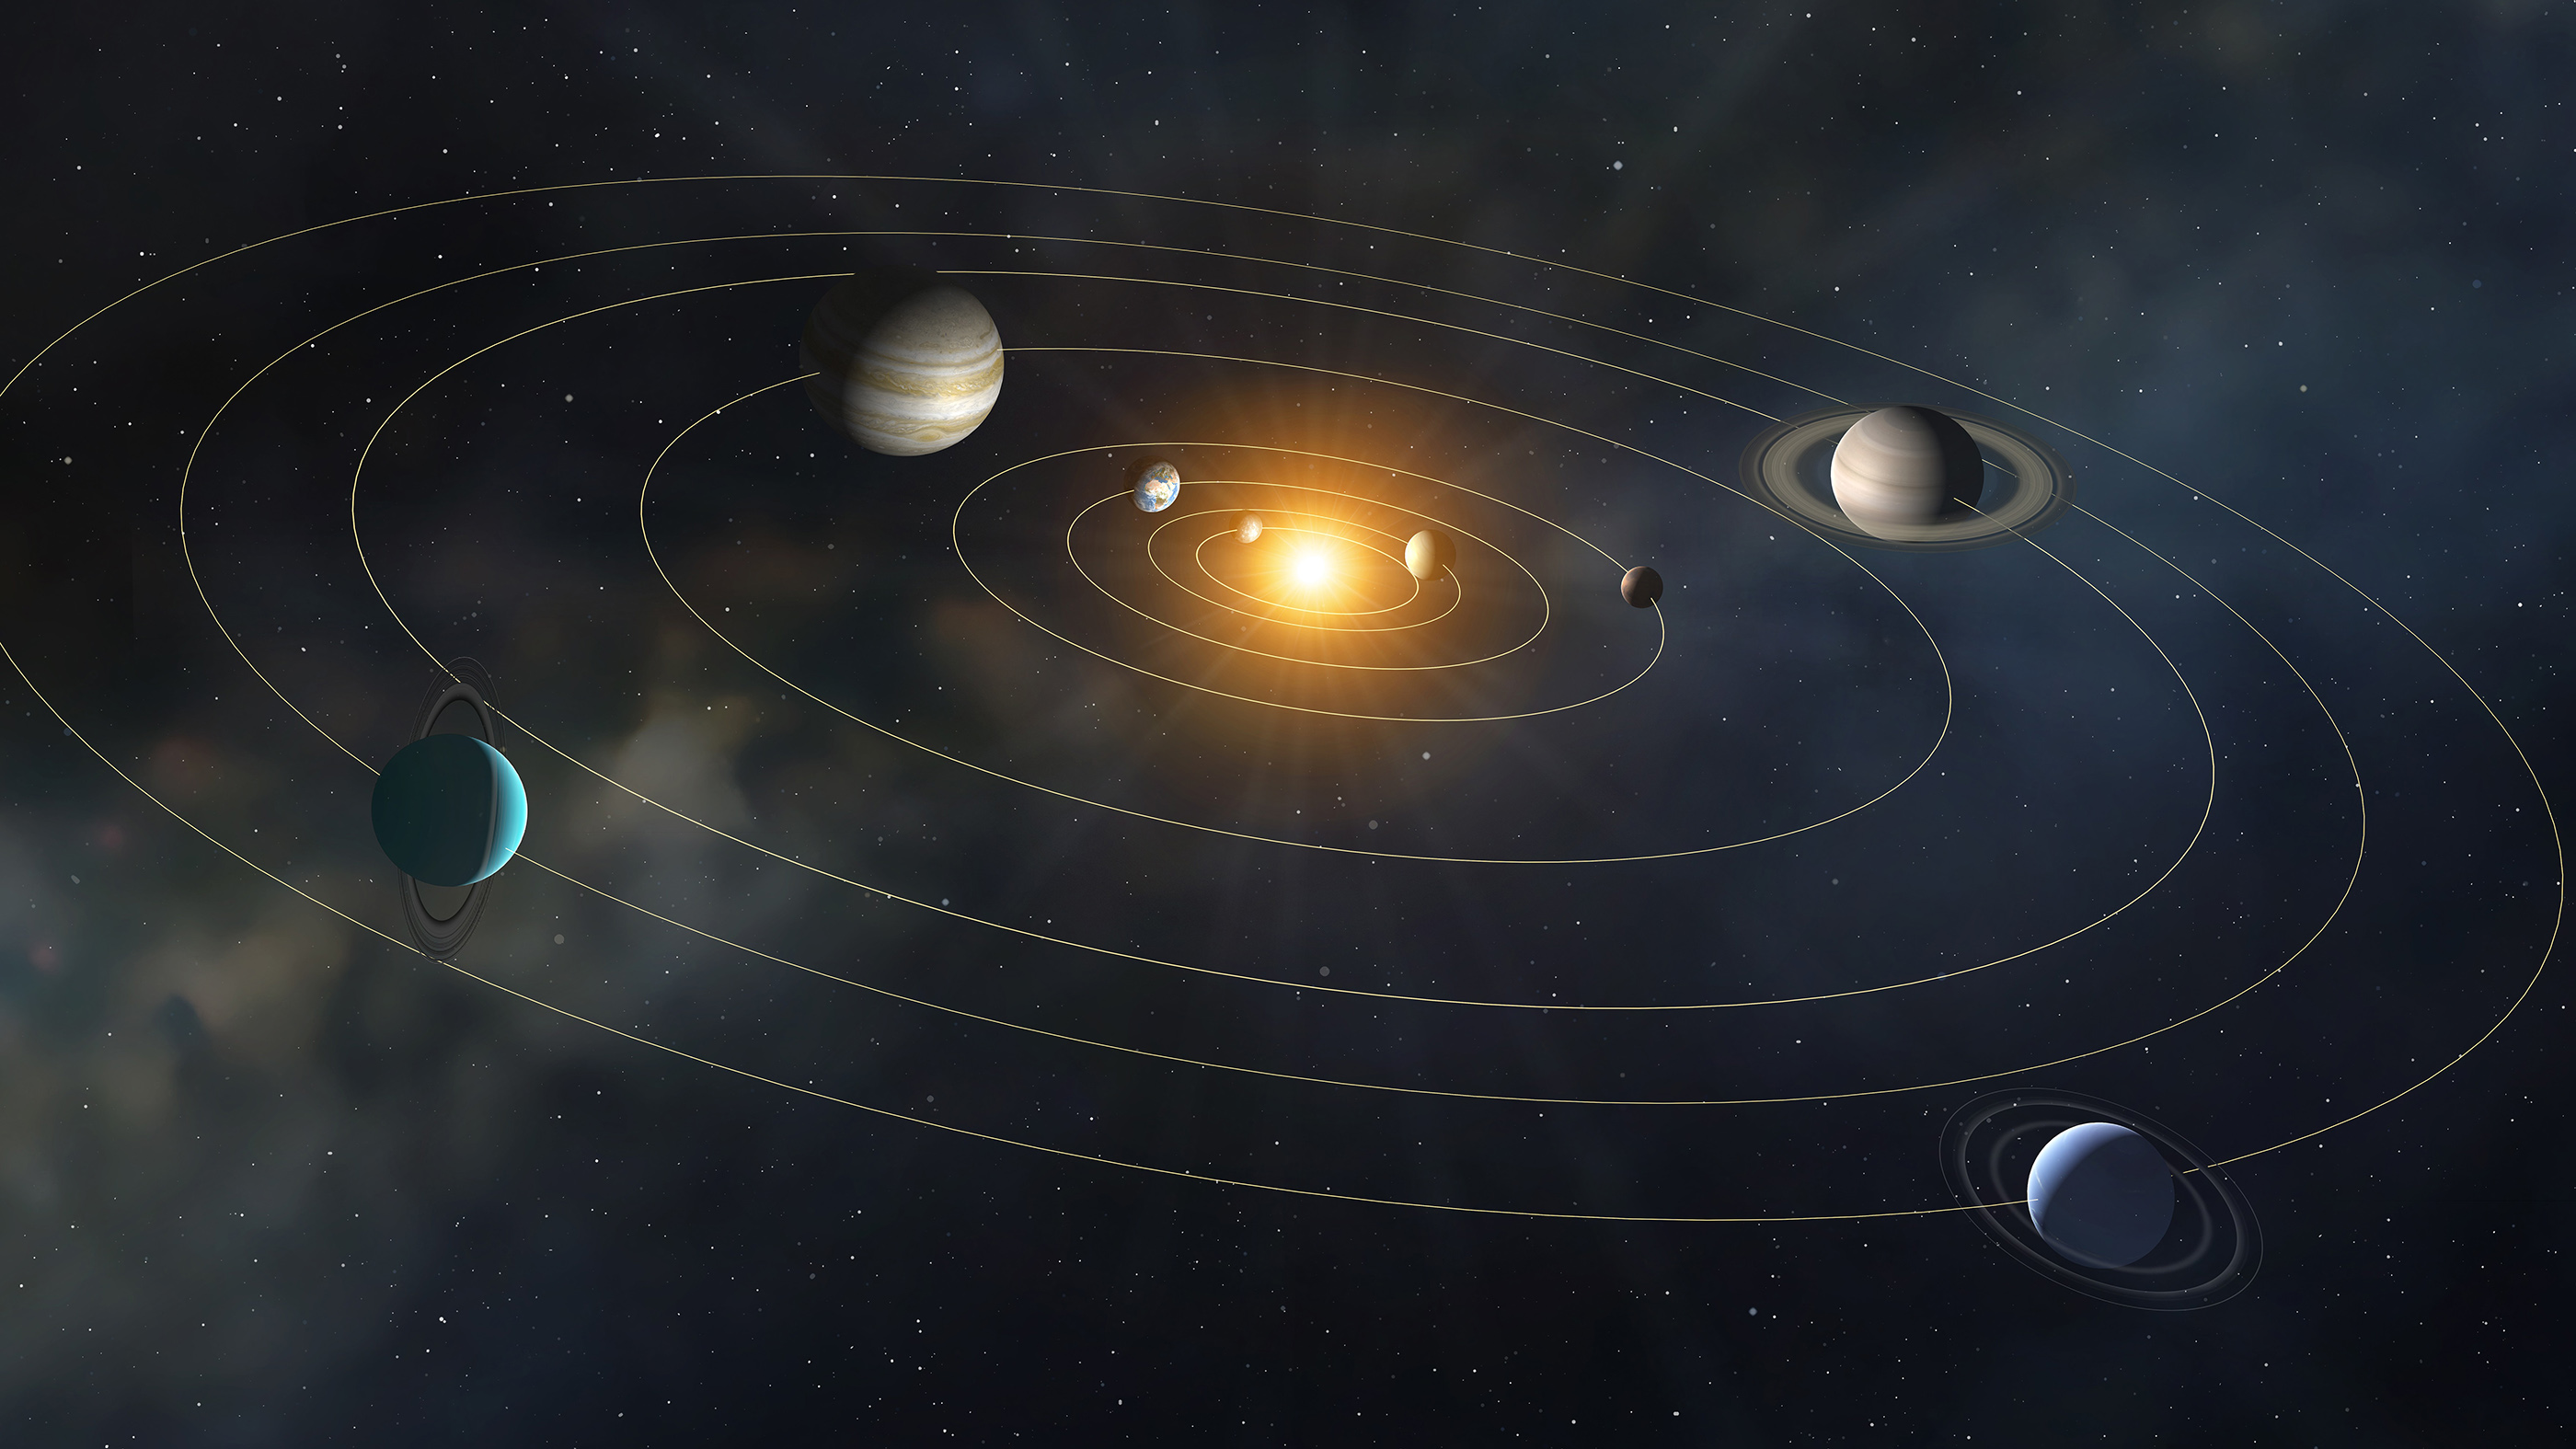 In this illustration, the eight major planets of the solar system are shown orbiting the sun.